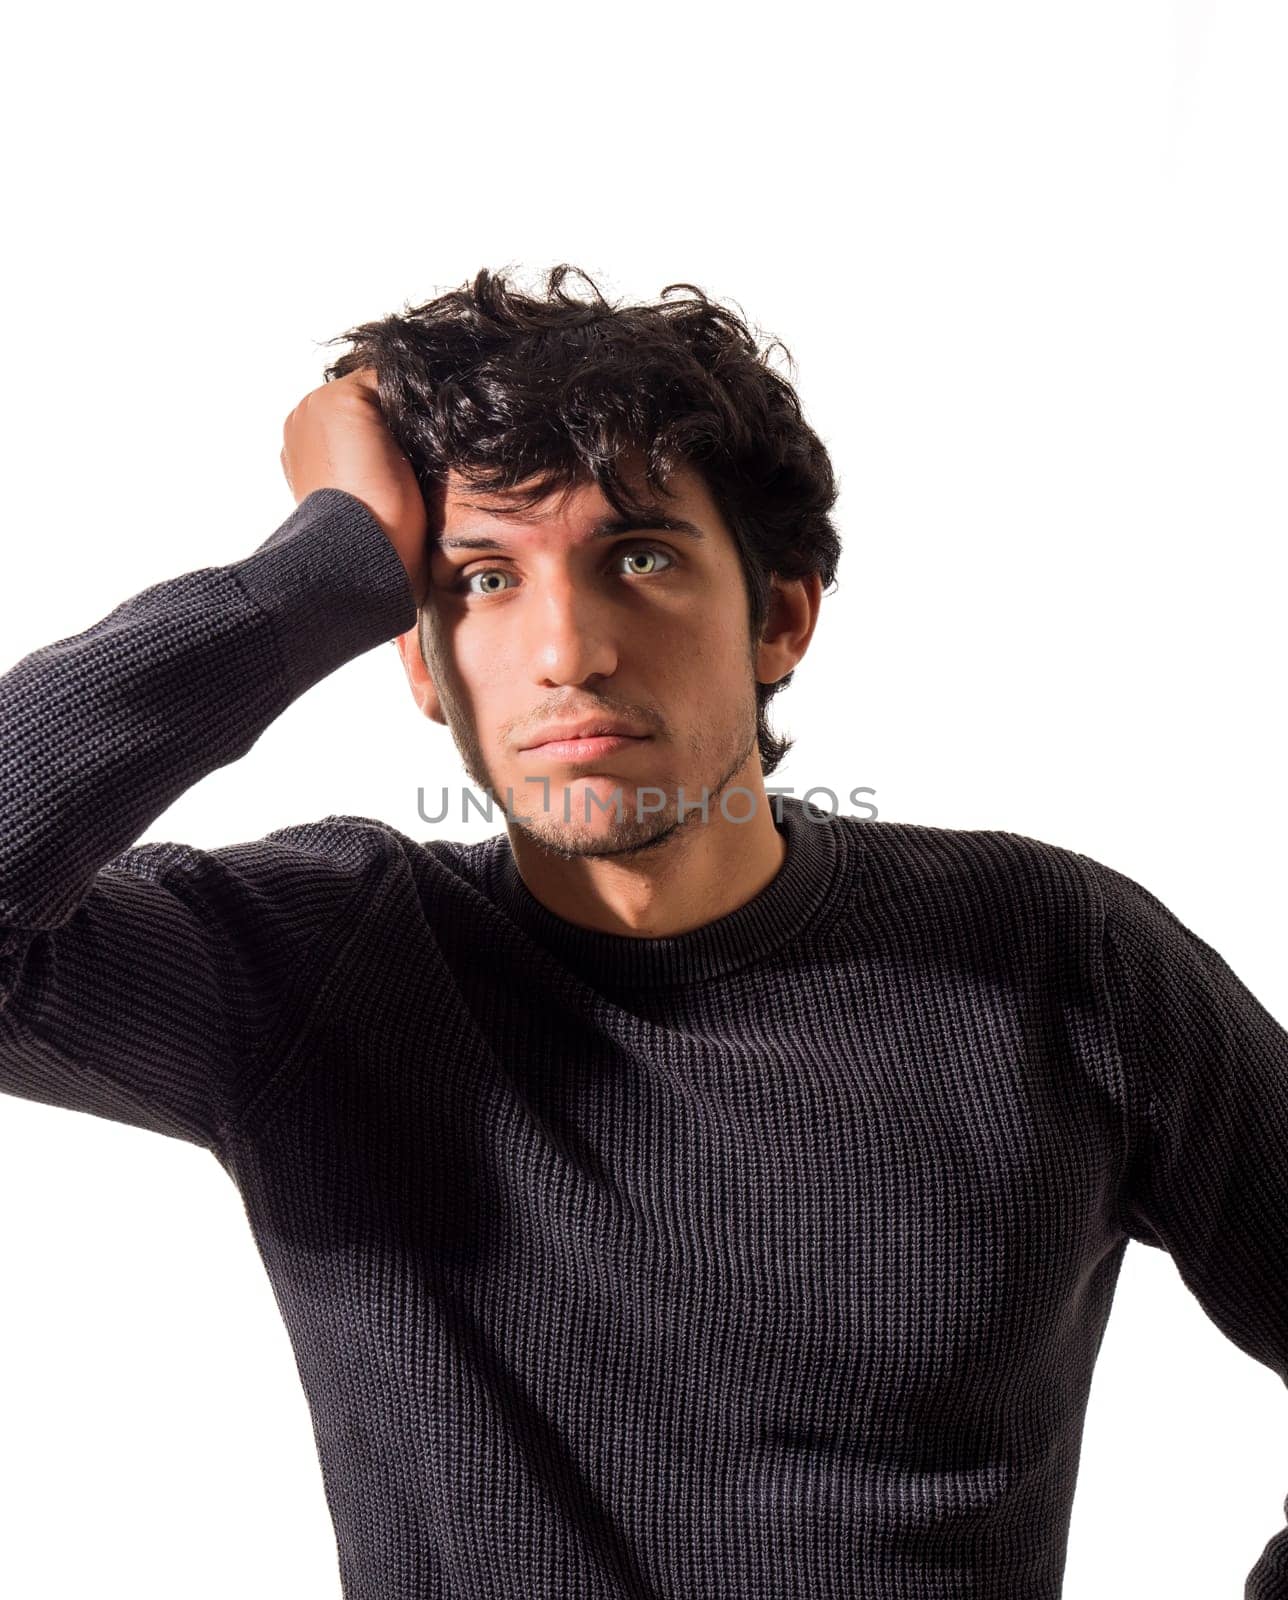 A young attractive man with curly hair is posing for a picture, with a puzzled, indecisive expression, isolated on white